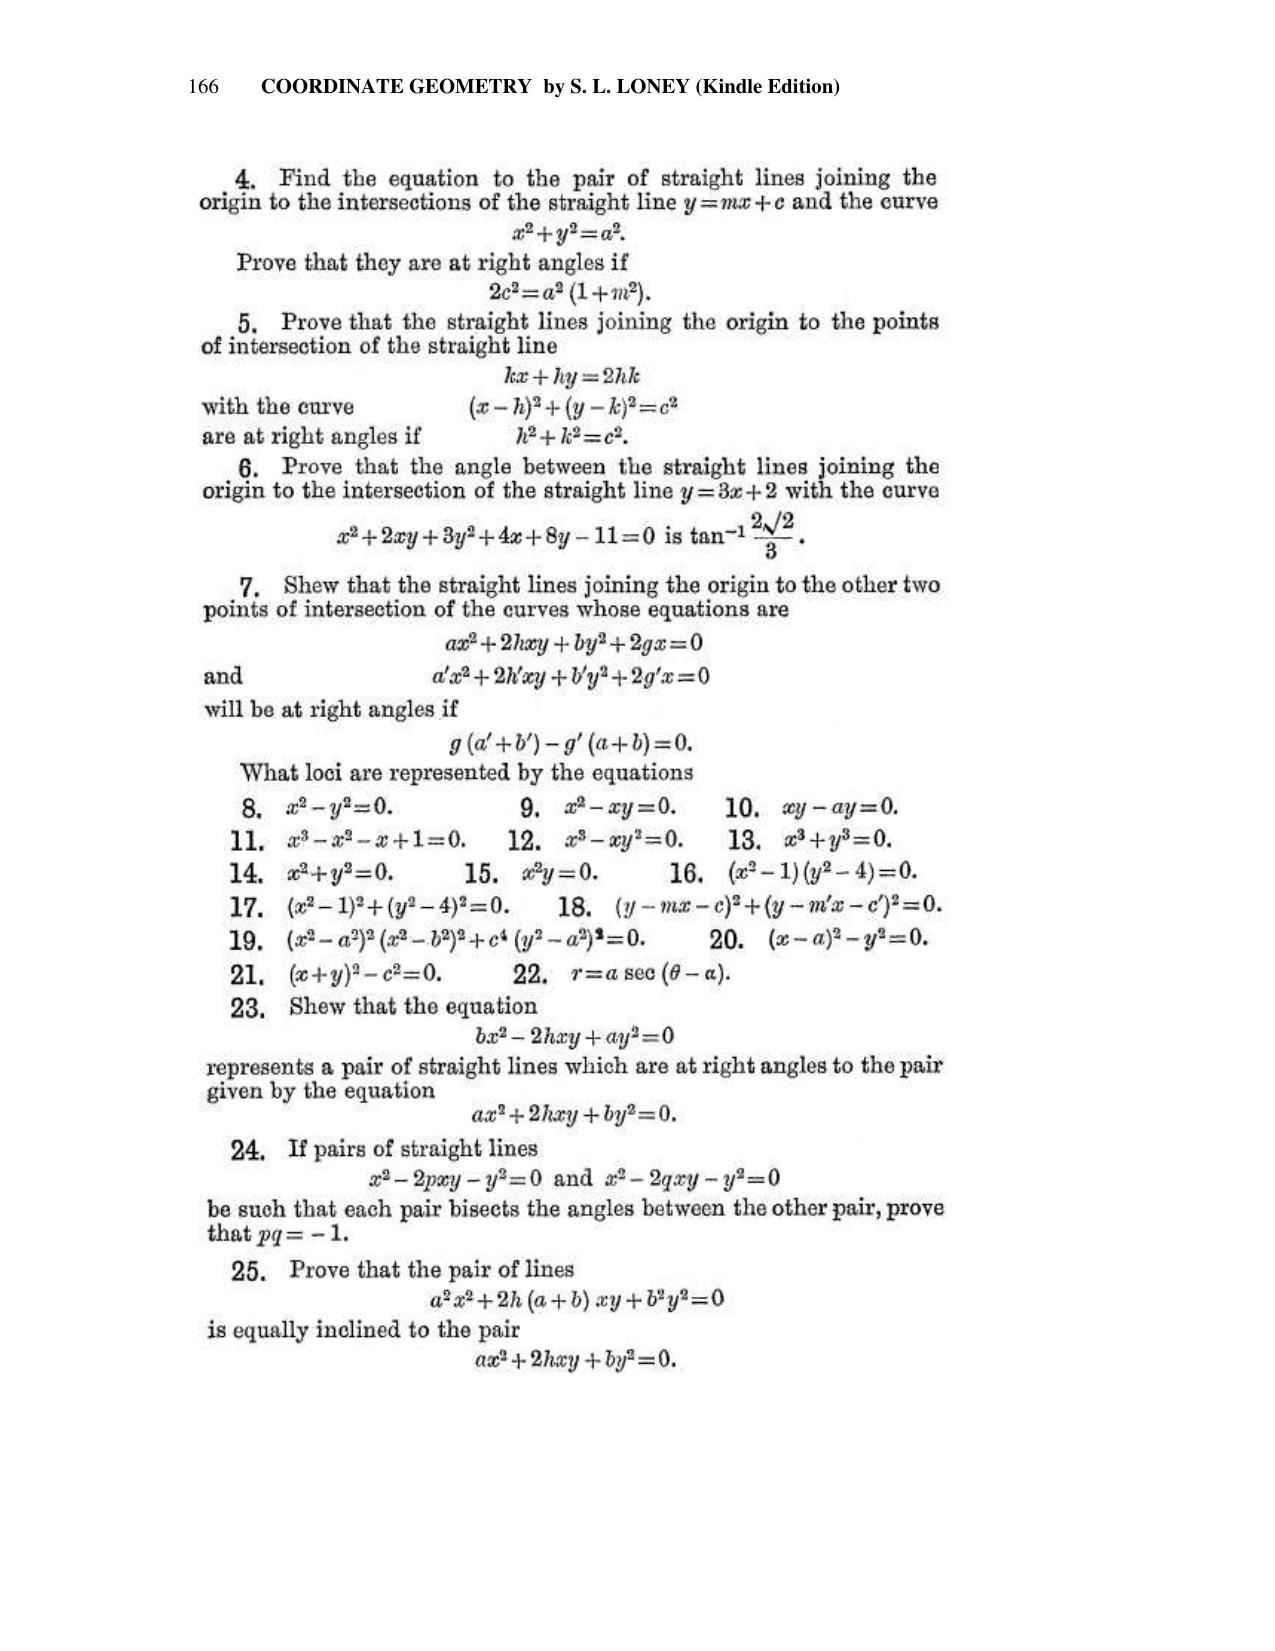 Chapter 6: On Equations Representing Two or More Straight Lines - SL Loney Solutions: The Elements of Coordinate Geometry - Page 27